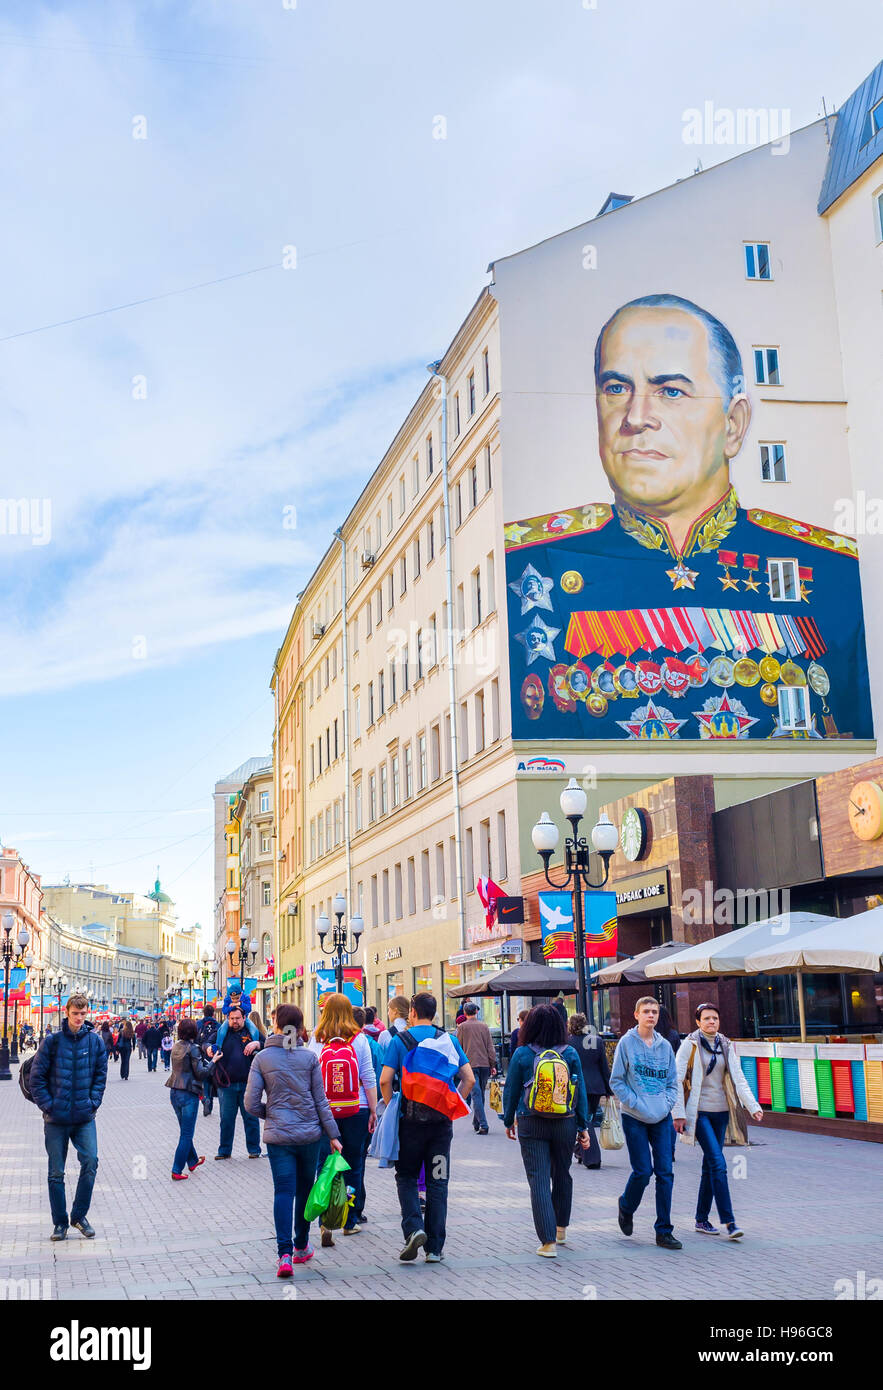 The portrait of Marshal of USSR Georgy Zhukov on the house wall at Arbat street Stock Photo